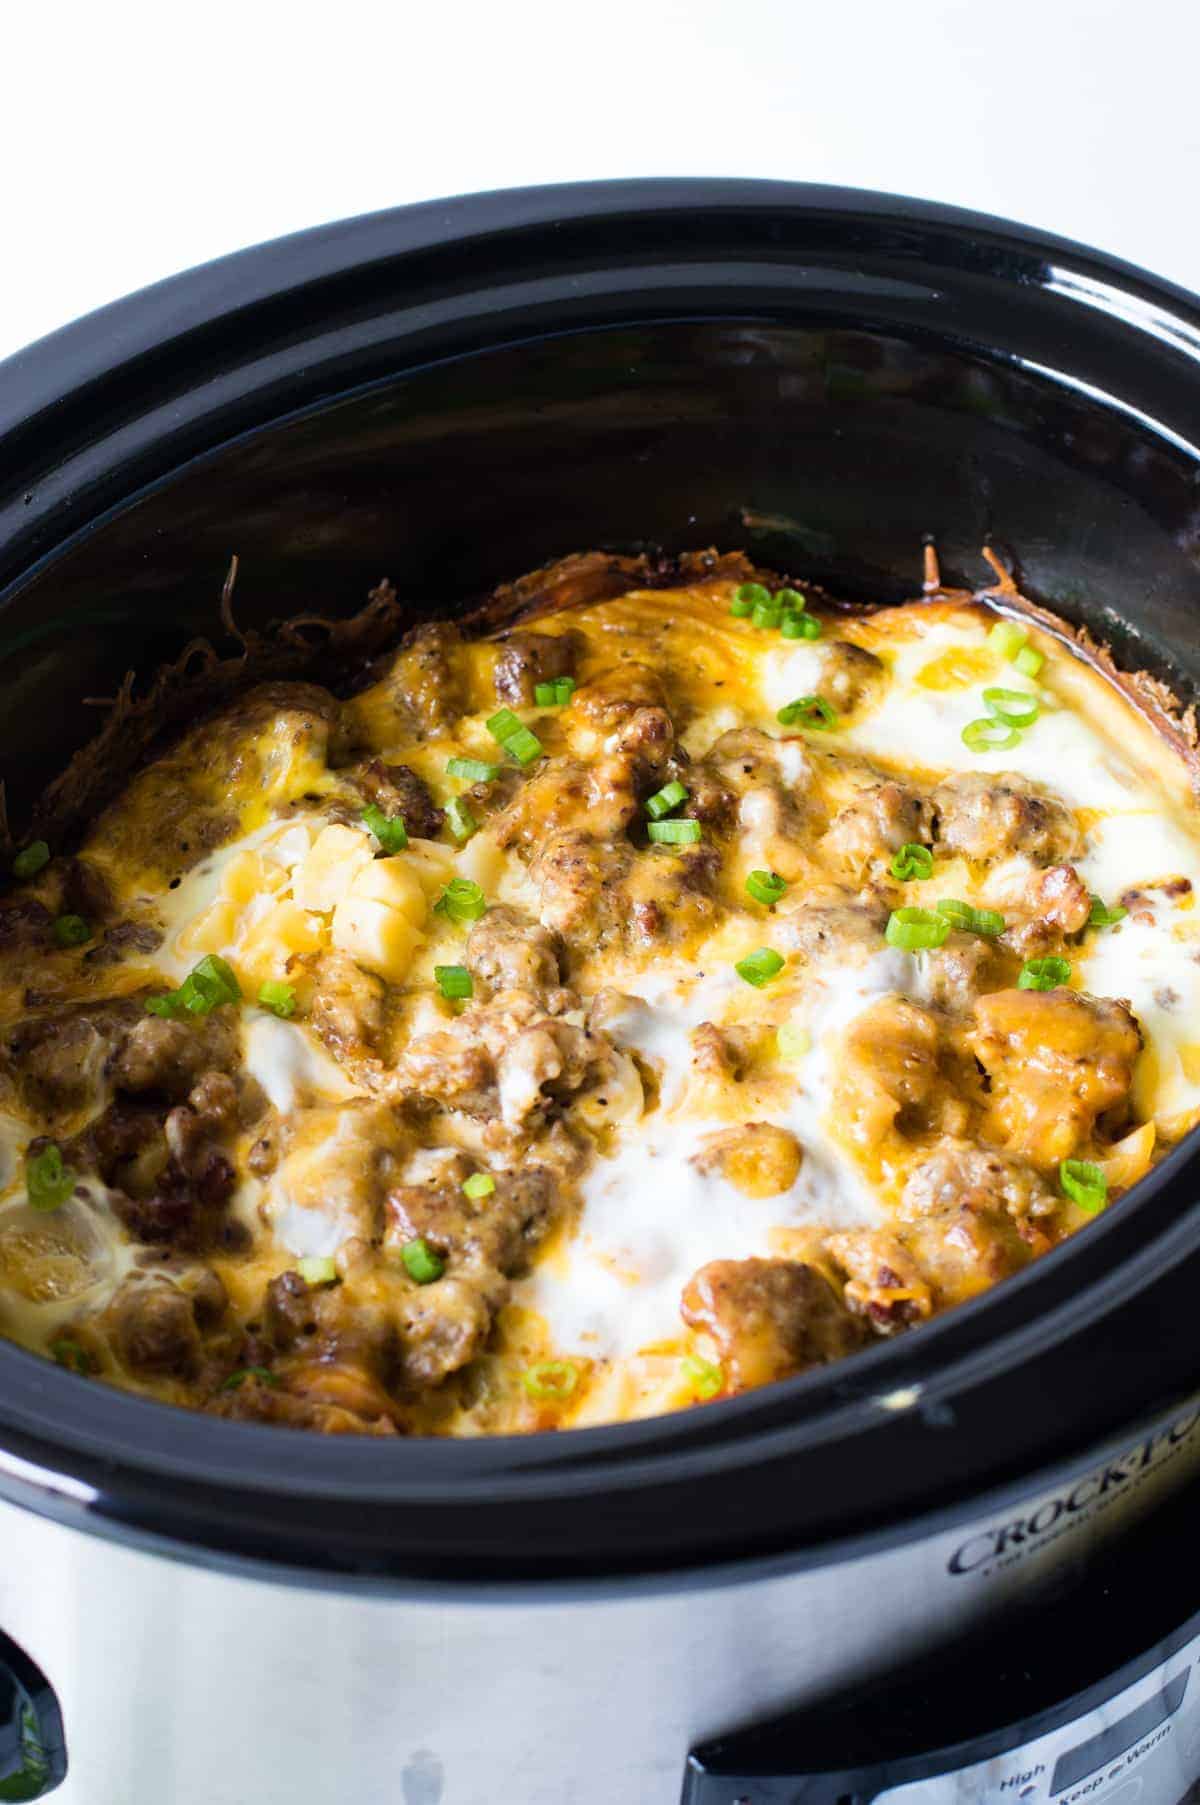 Leftover Pork Breakfast Casserole Crockpot : Slow Cooked Pork Recipe Leigh Anne Wilkes / You can mix things up and add in different meats.